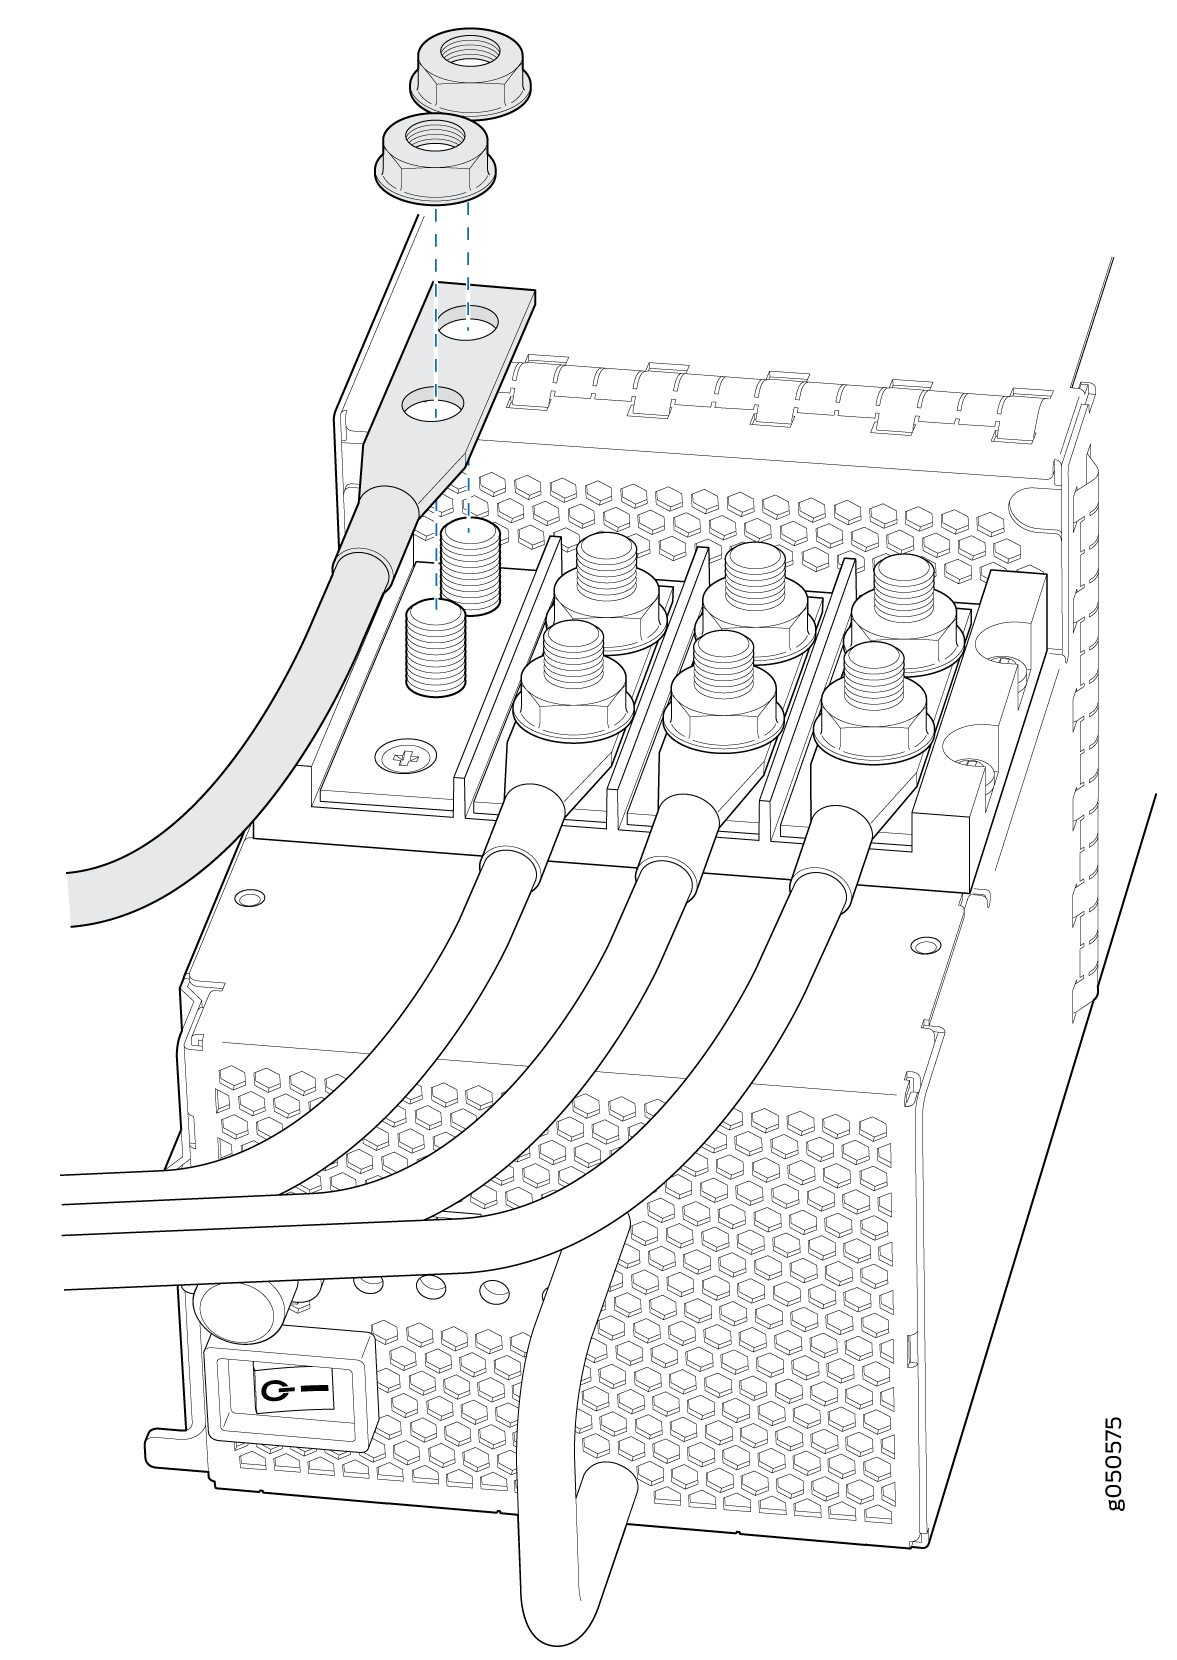 Connecting DC Power Supply Cables to an MX10016